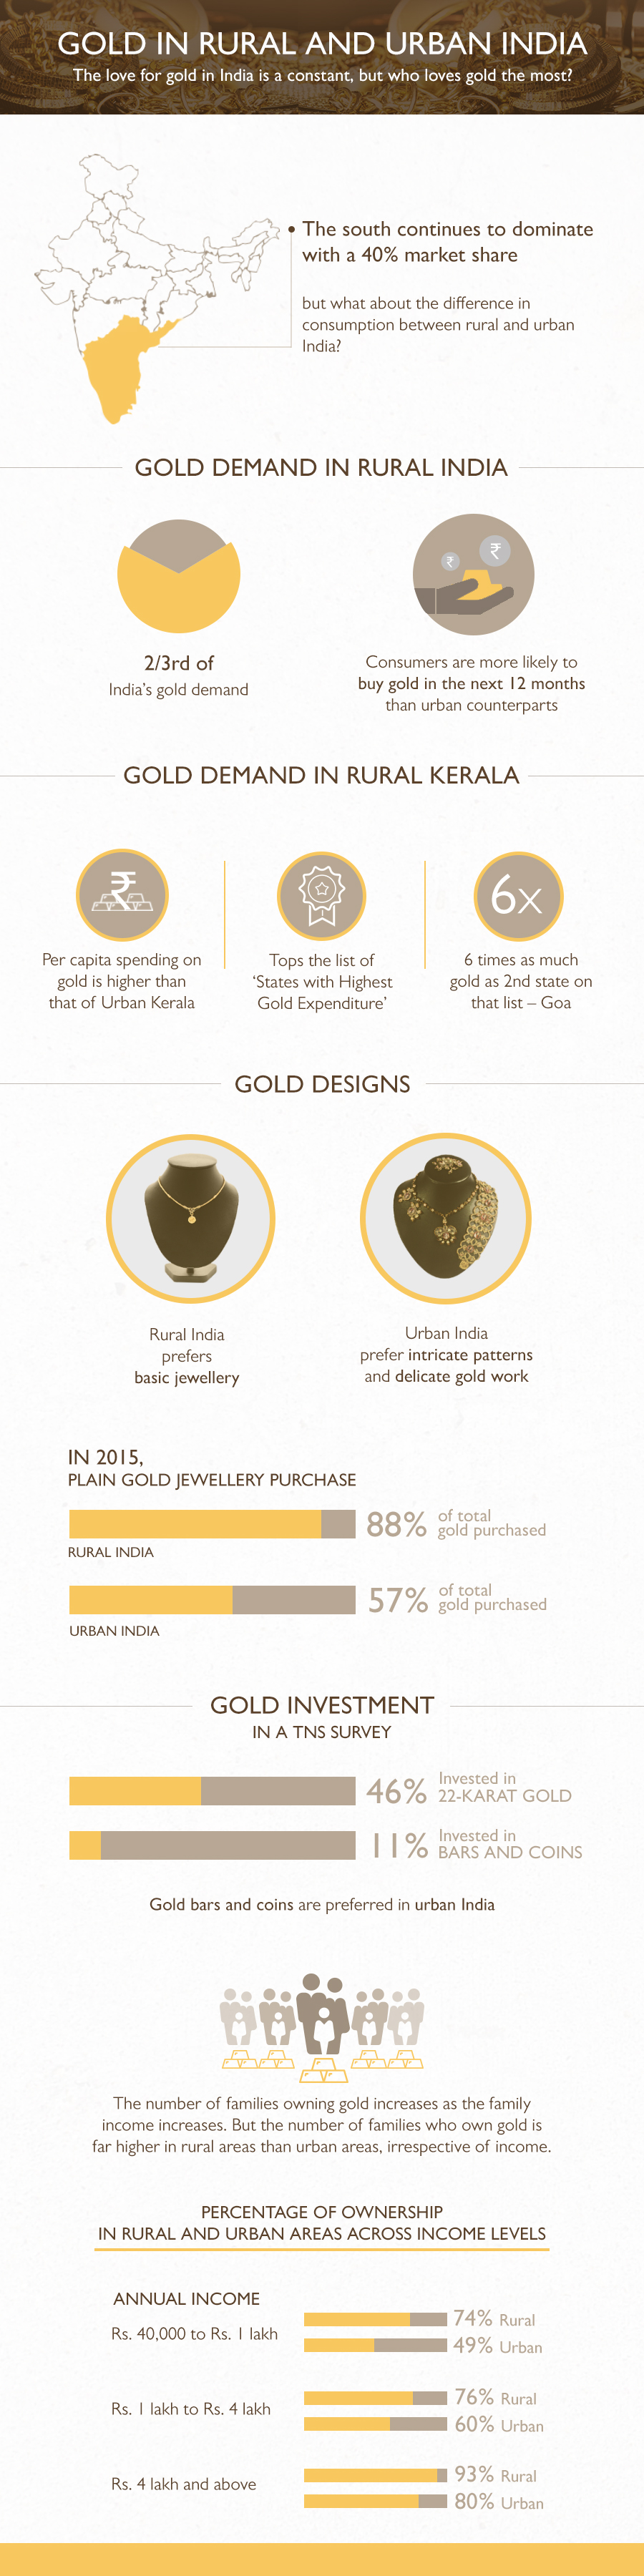 Demand of gold in rural areas is 2/3rd of the total gold demand in India. Understand the consumption pattern of gold in rural and urban India and various gold items rural and urban Indians buy.